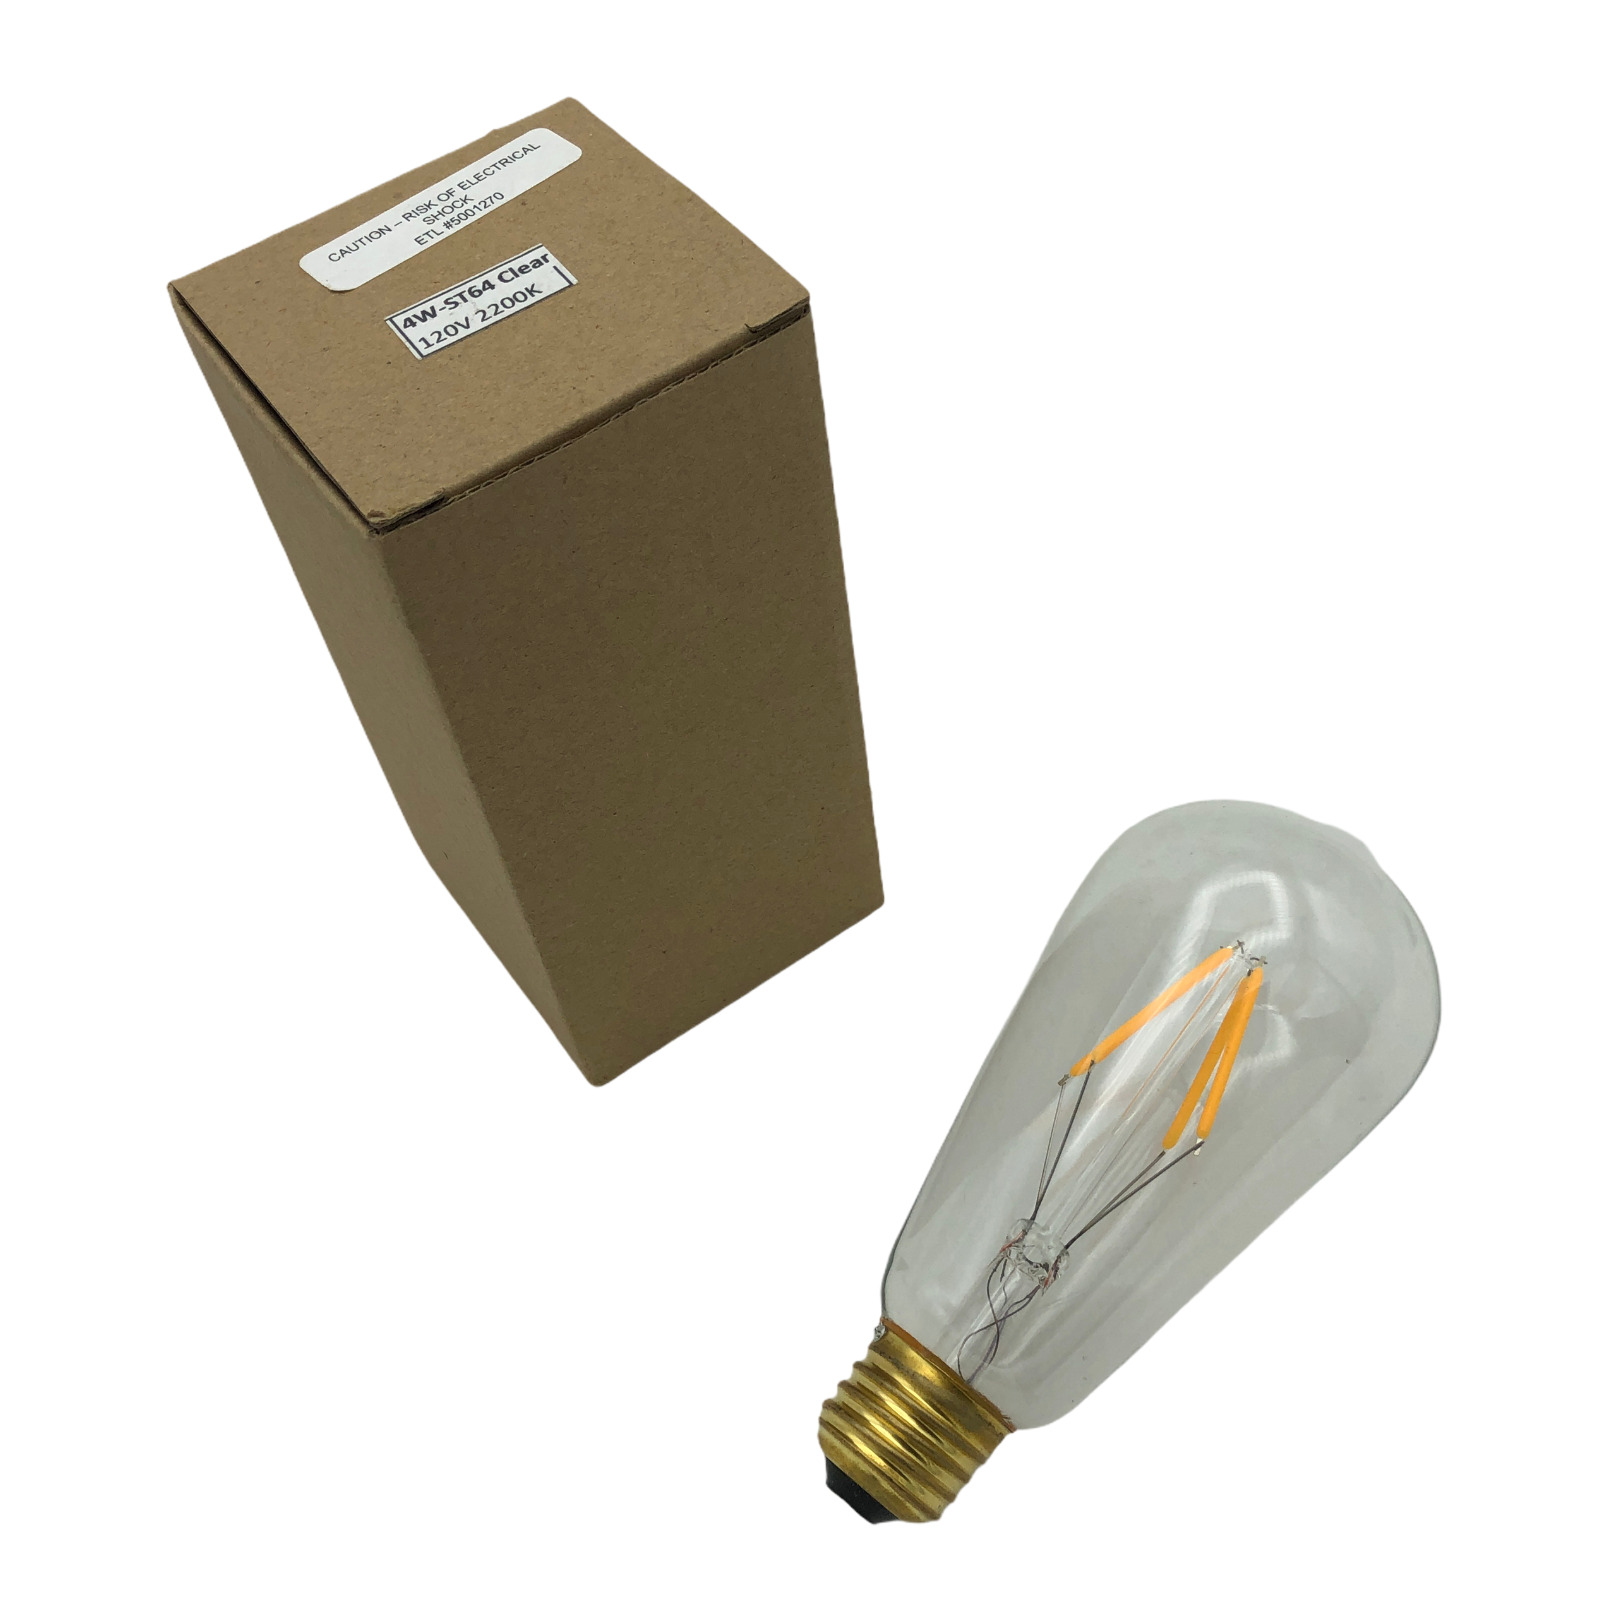 Aamsco 4W-ST64-Clear LED ST64 Antique Filament Lamp 4W 2200K Dimmable E26 120V 